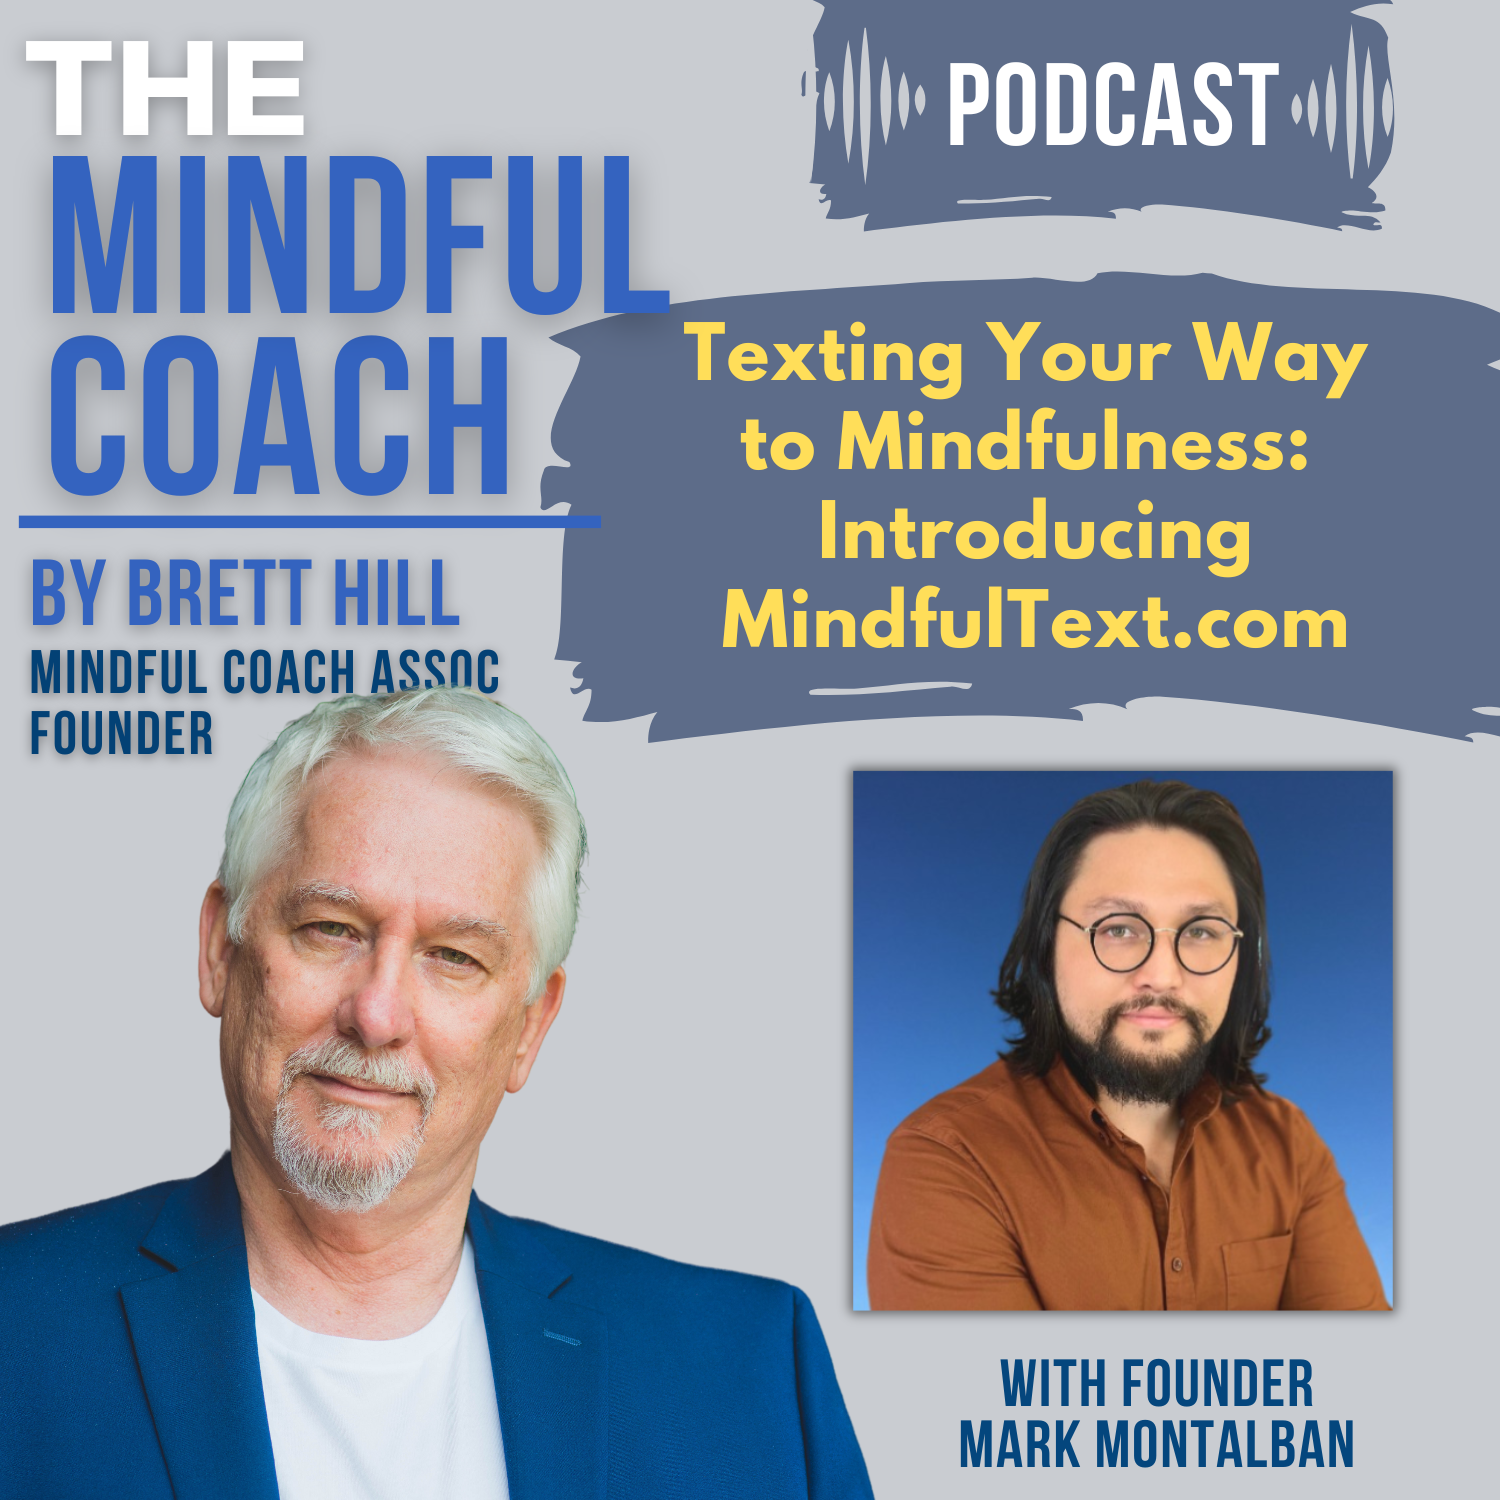 Artwork for podcast The Mindful Coach Podcast